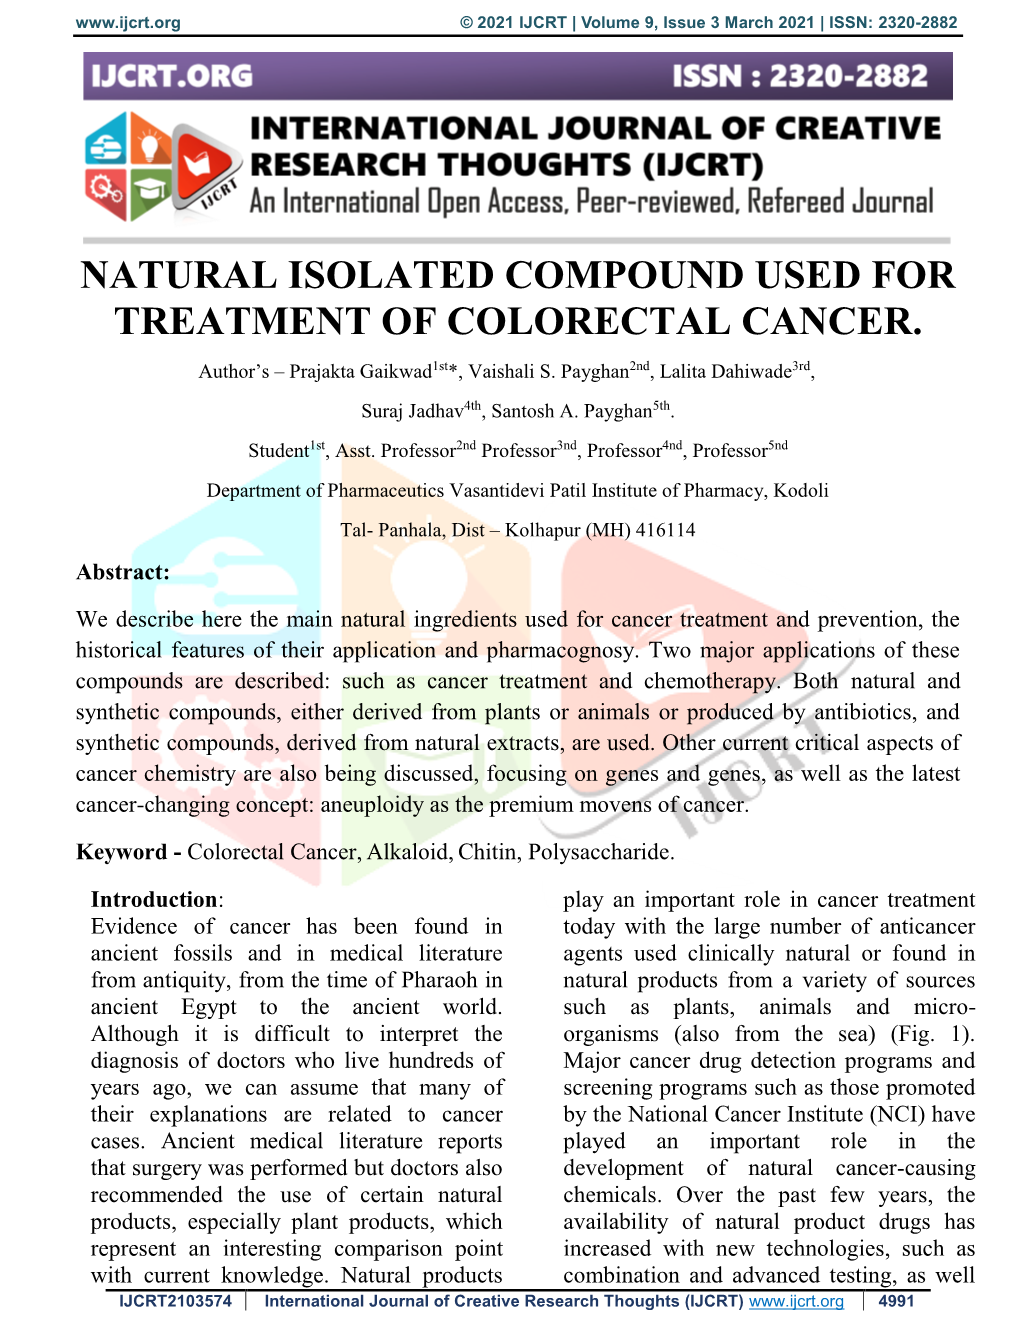 Natural Isolated Compound Used for Treatment of Colorectal Cancer